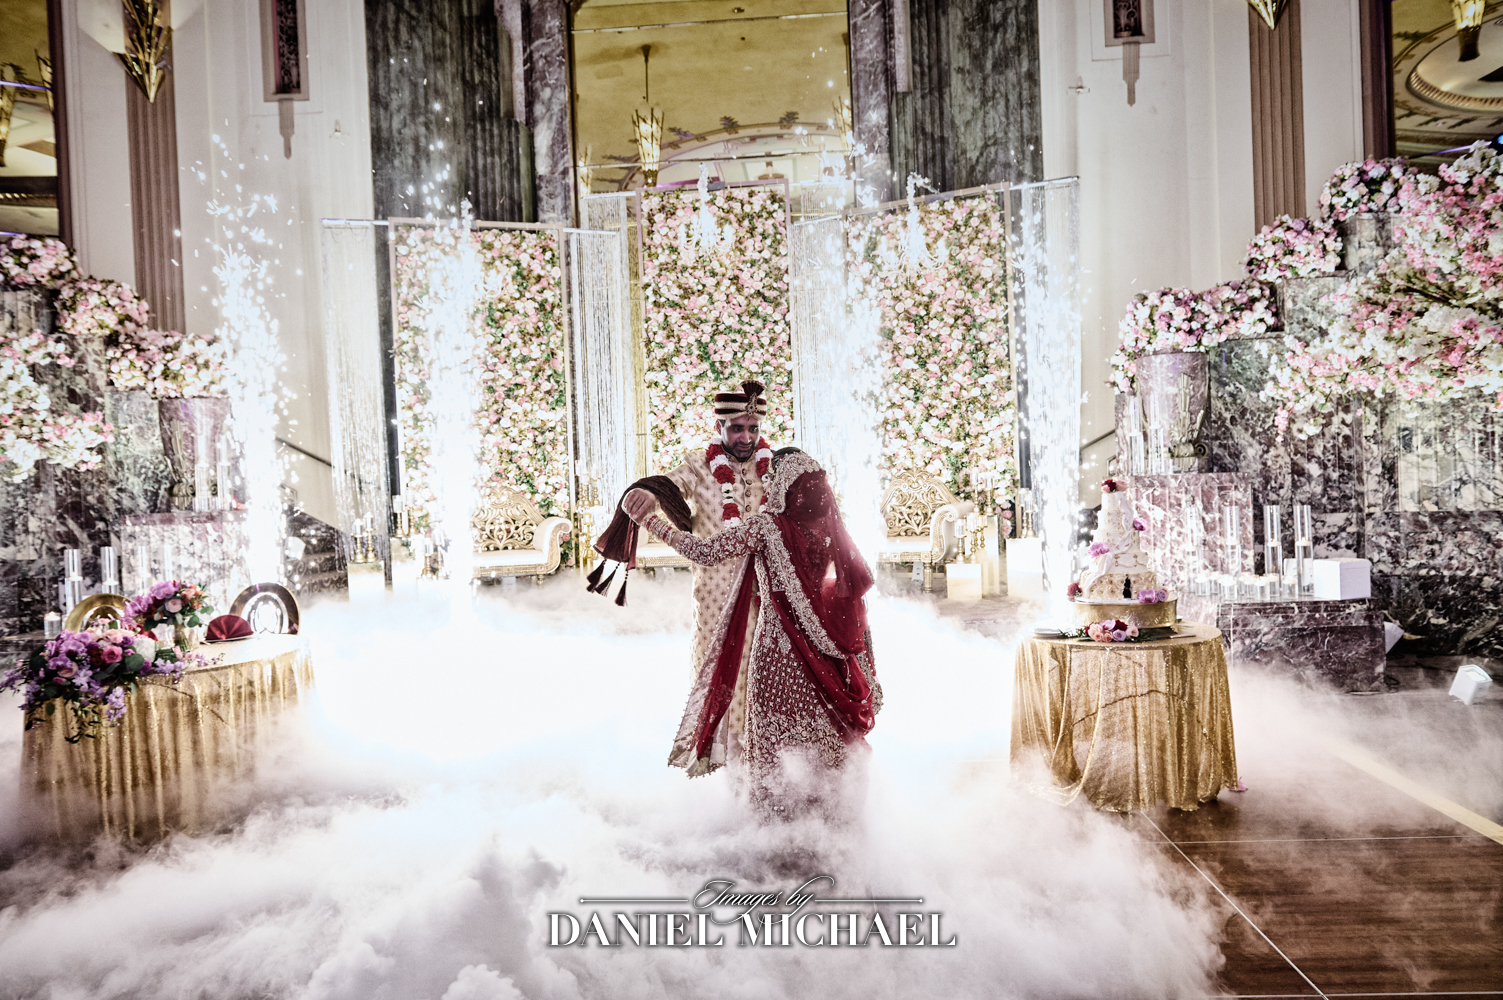 Muslim wedding celebration featuring a dancing couple with a dramatic cold spark and cloud effect